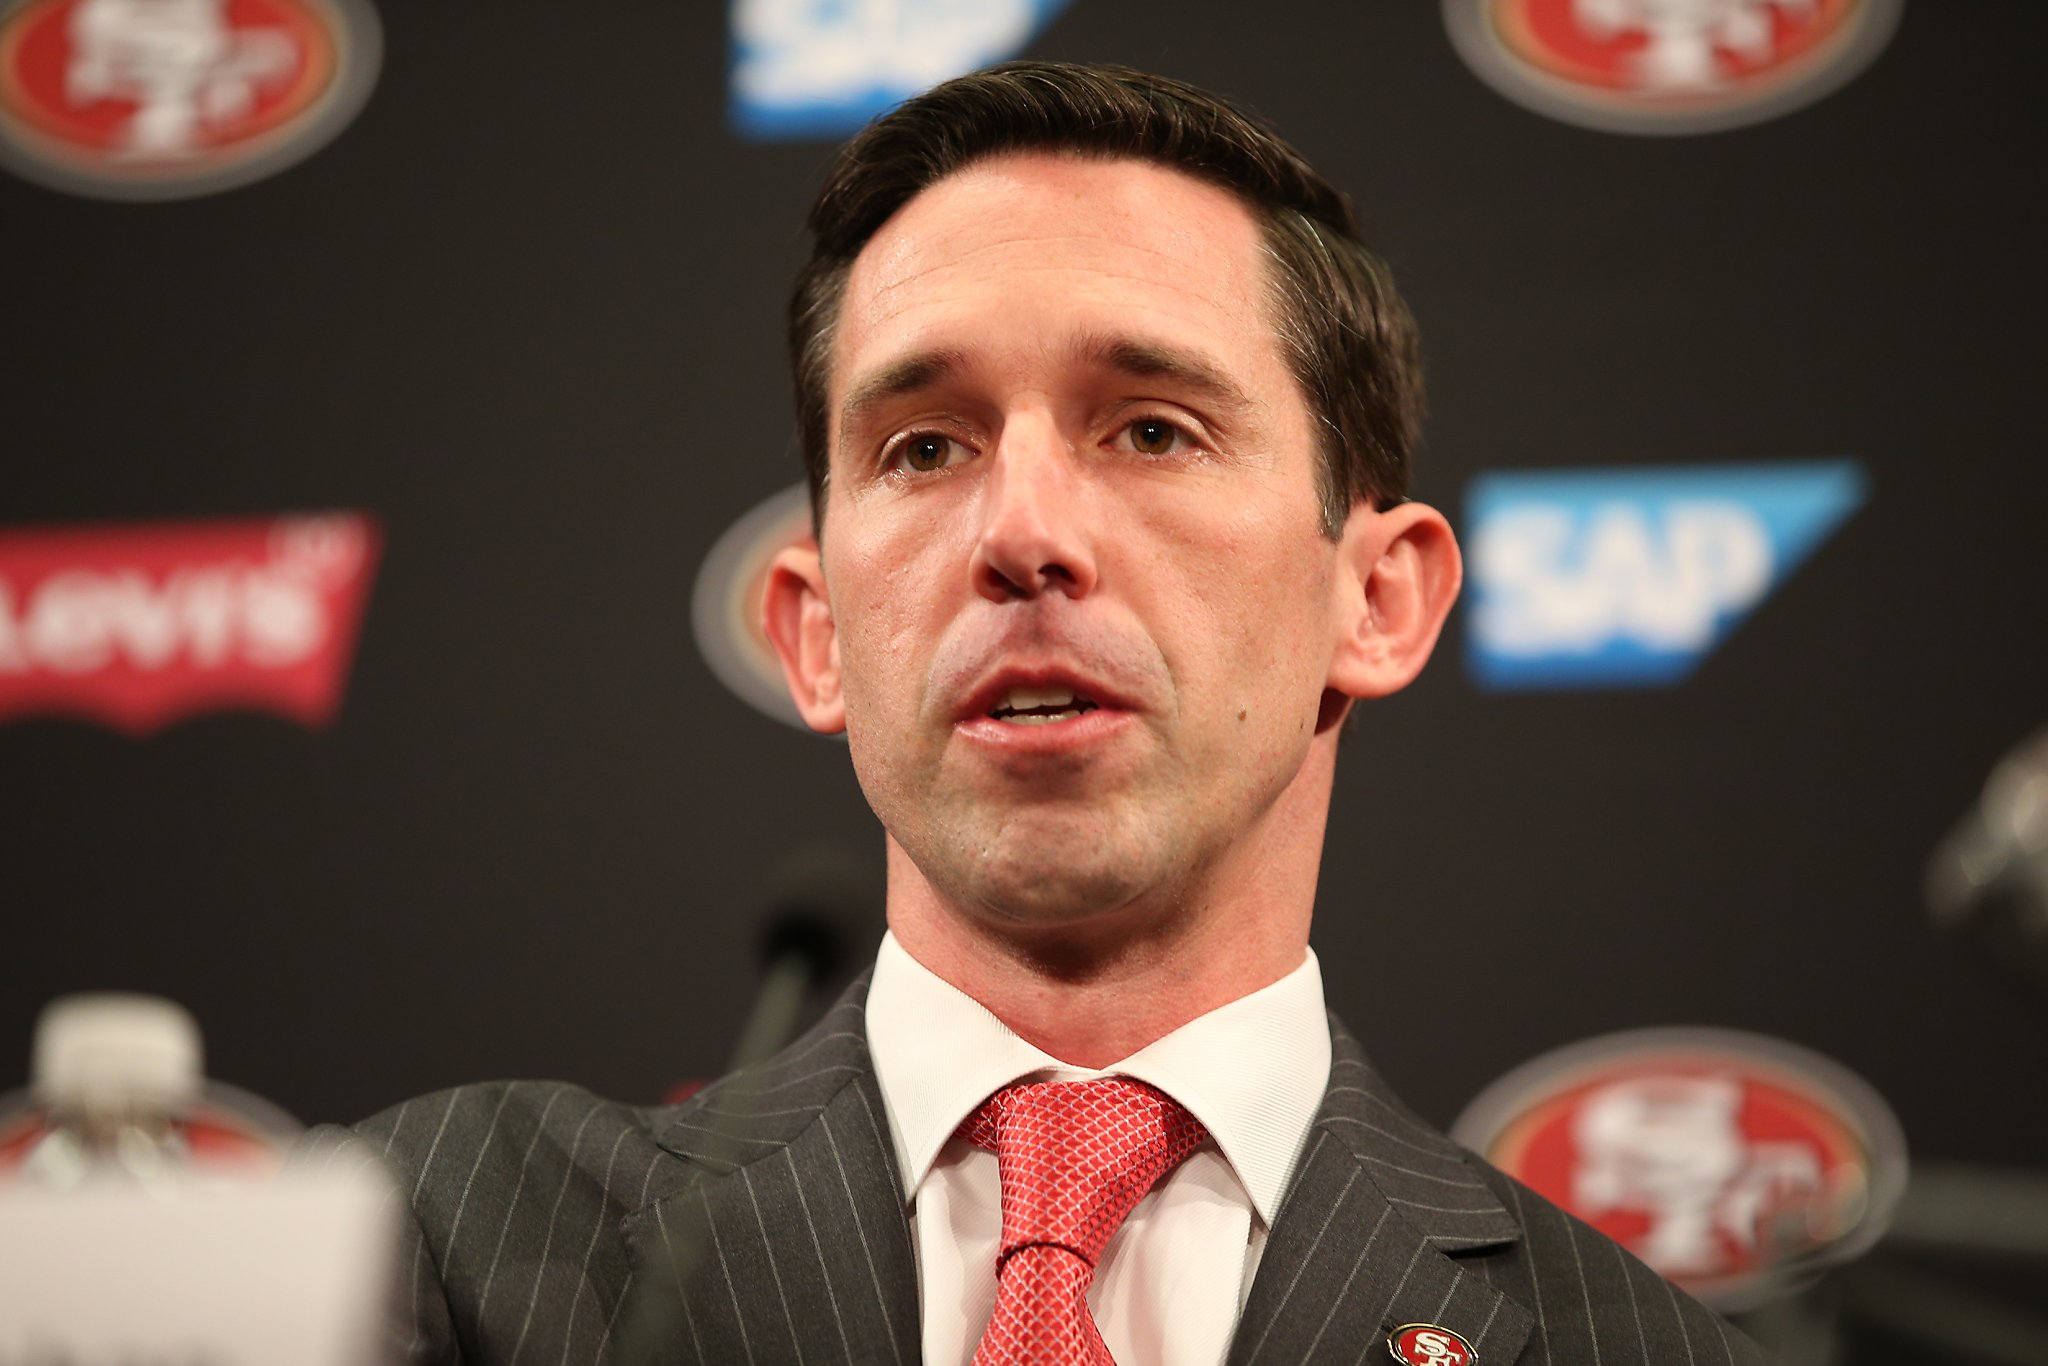 49ers: Shanahan has 53-man roster control; Mayhew hired; Kaepernick reached out - SFGate2048 x 1366